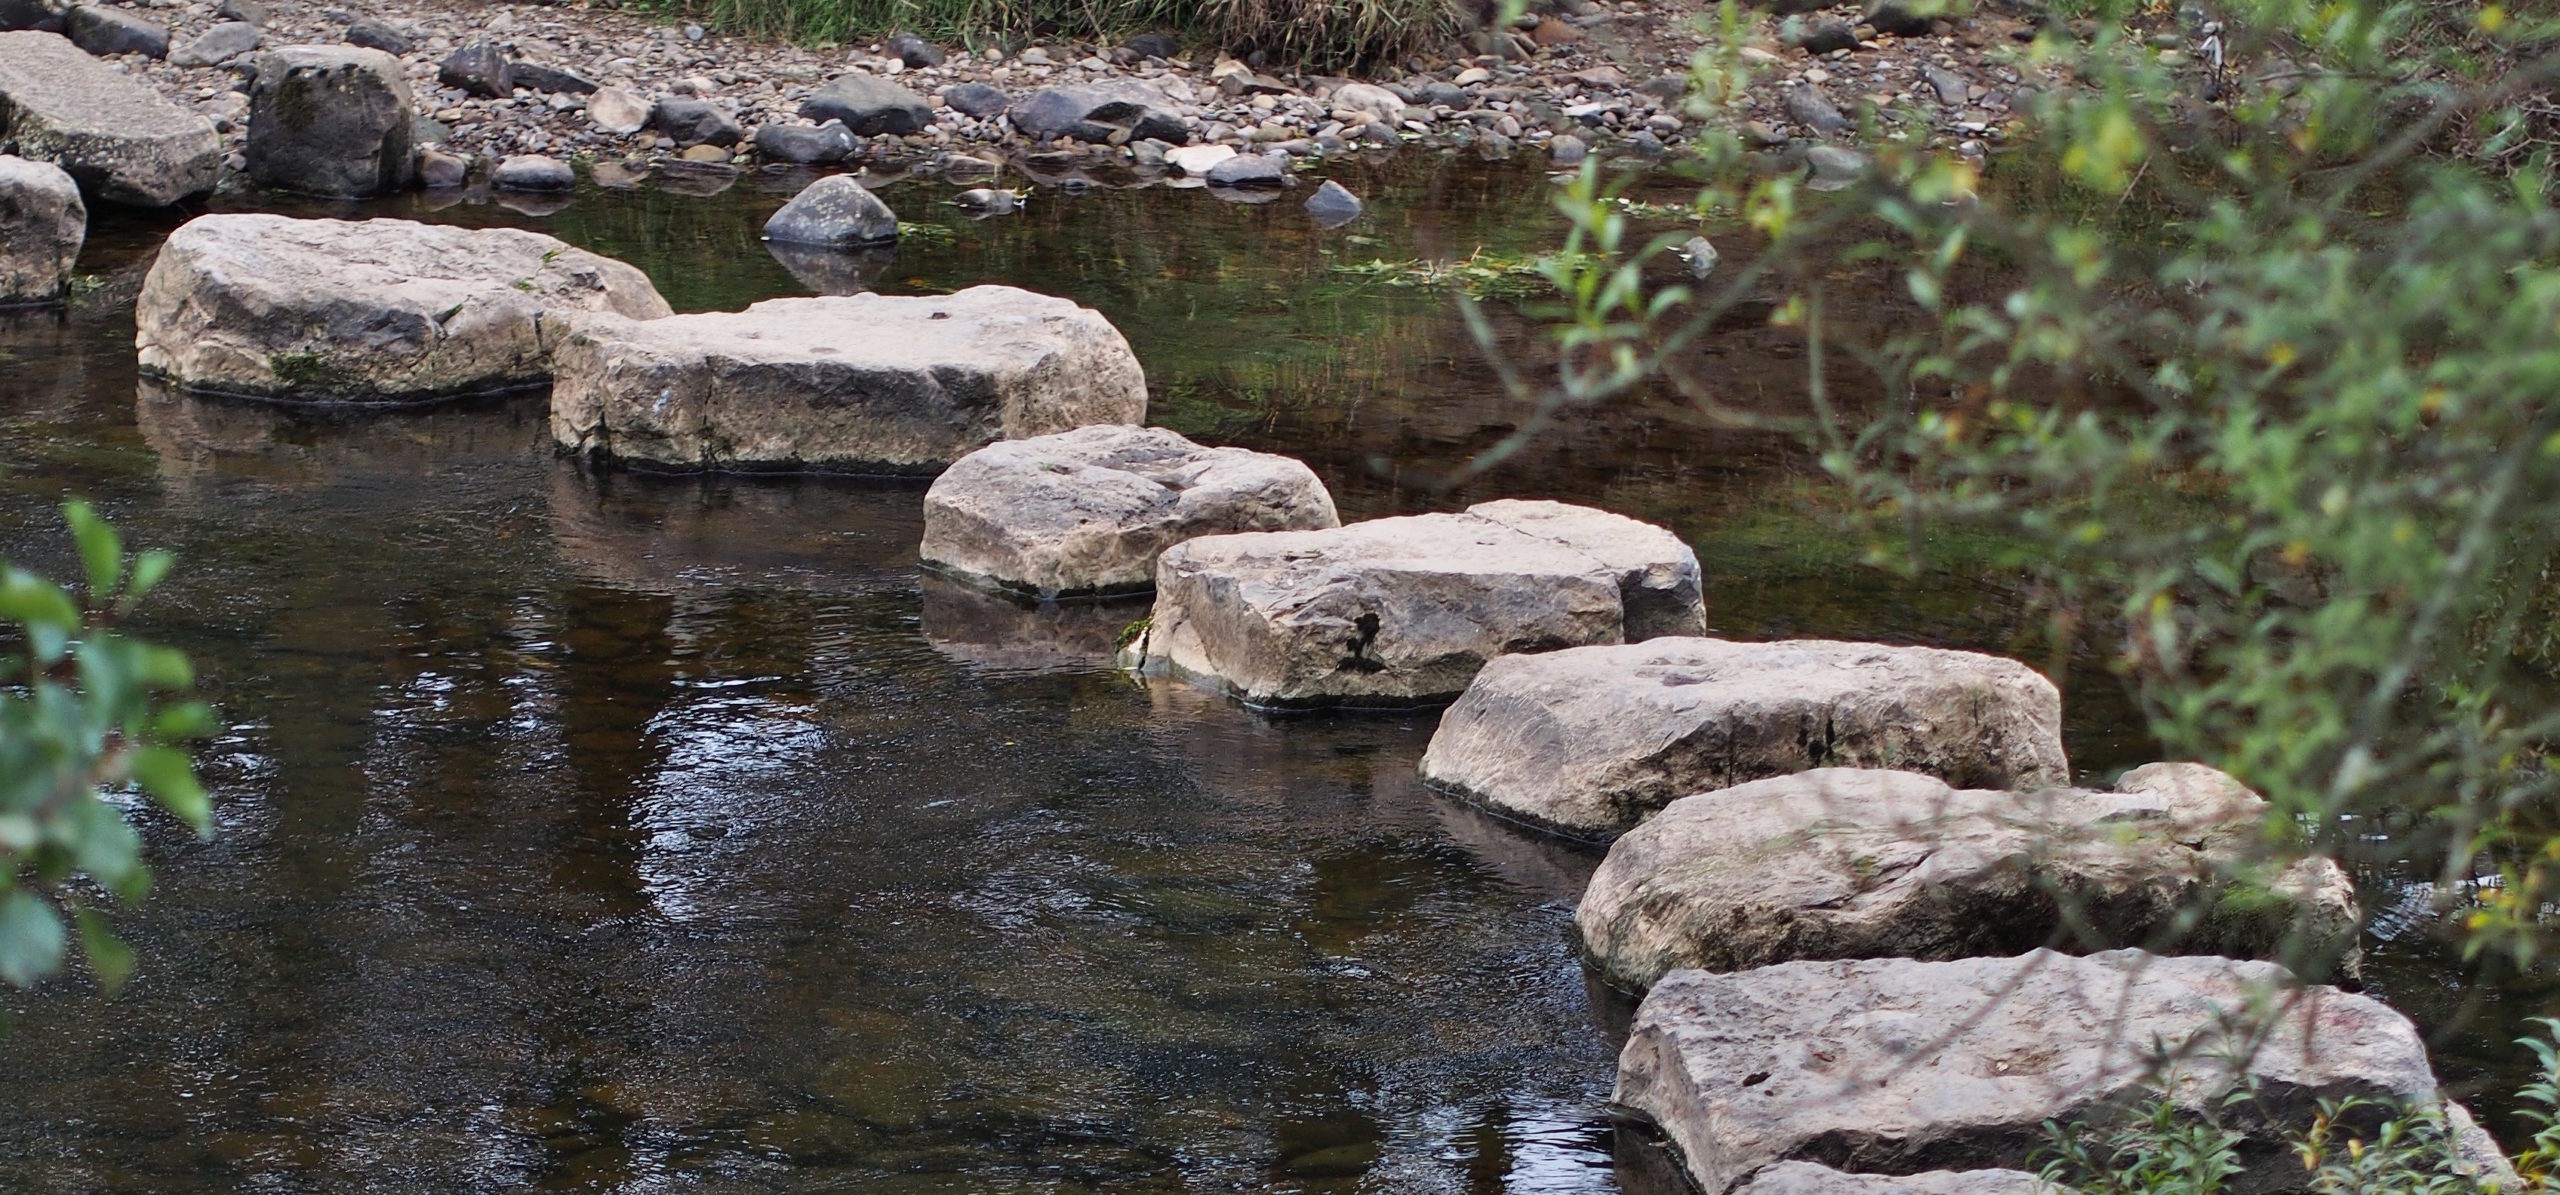 The Chaordic Stepping Stones